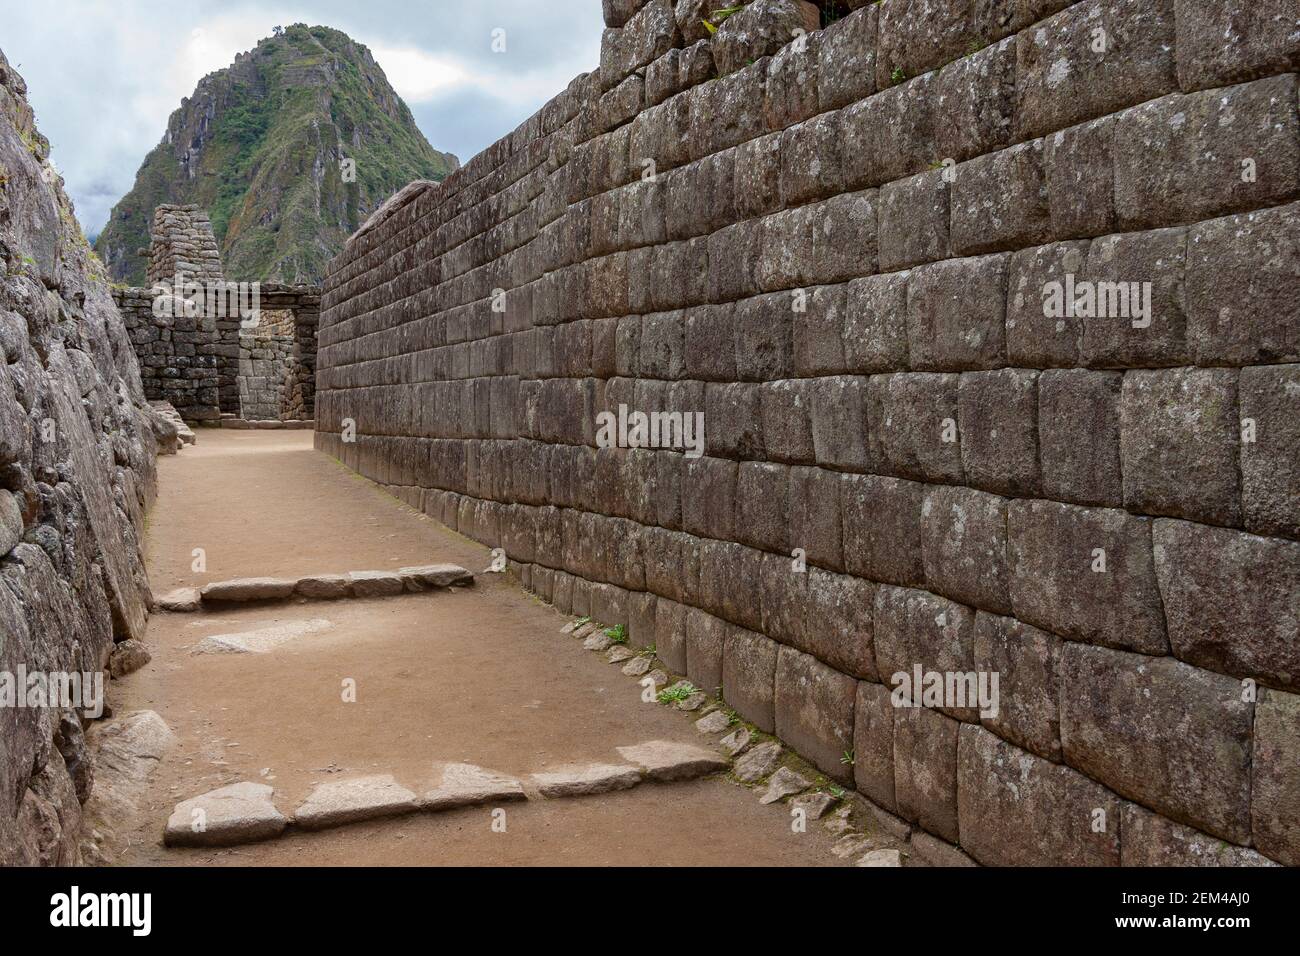 The Inca city of Machu Picchu in Peru, South America. Although known locally, it was not known to the Spanish during the colonial period and was unkno Stock Photo